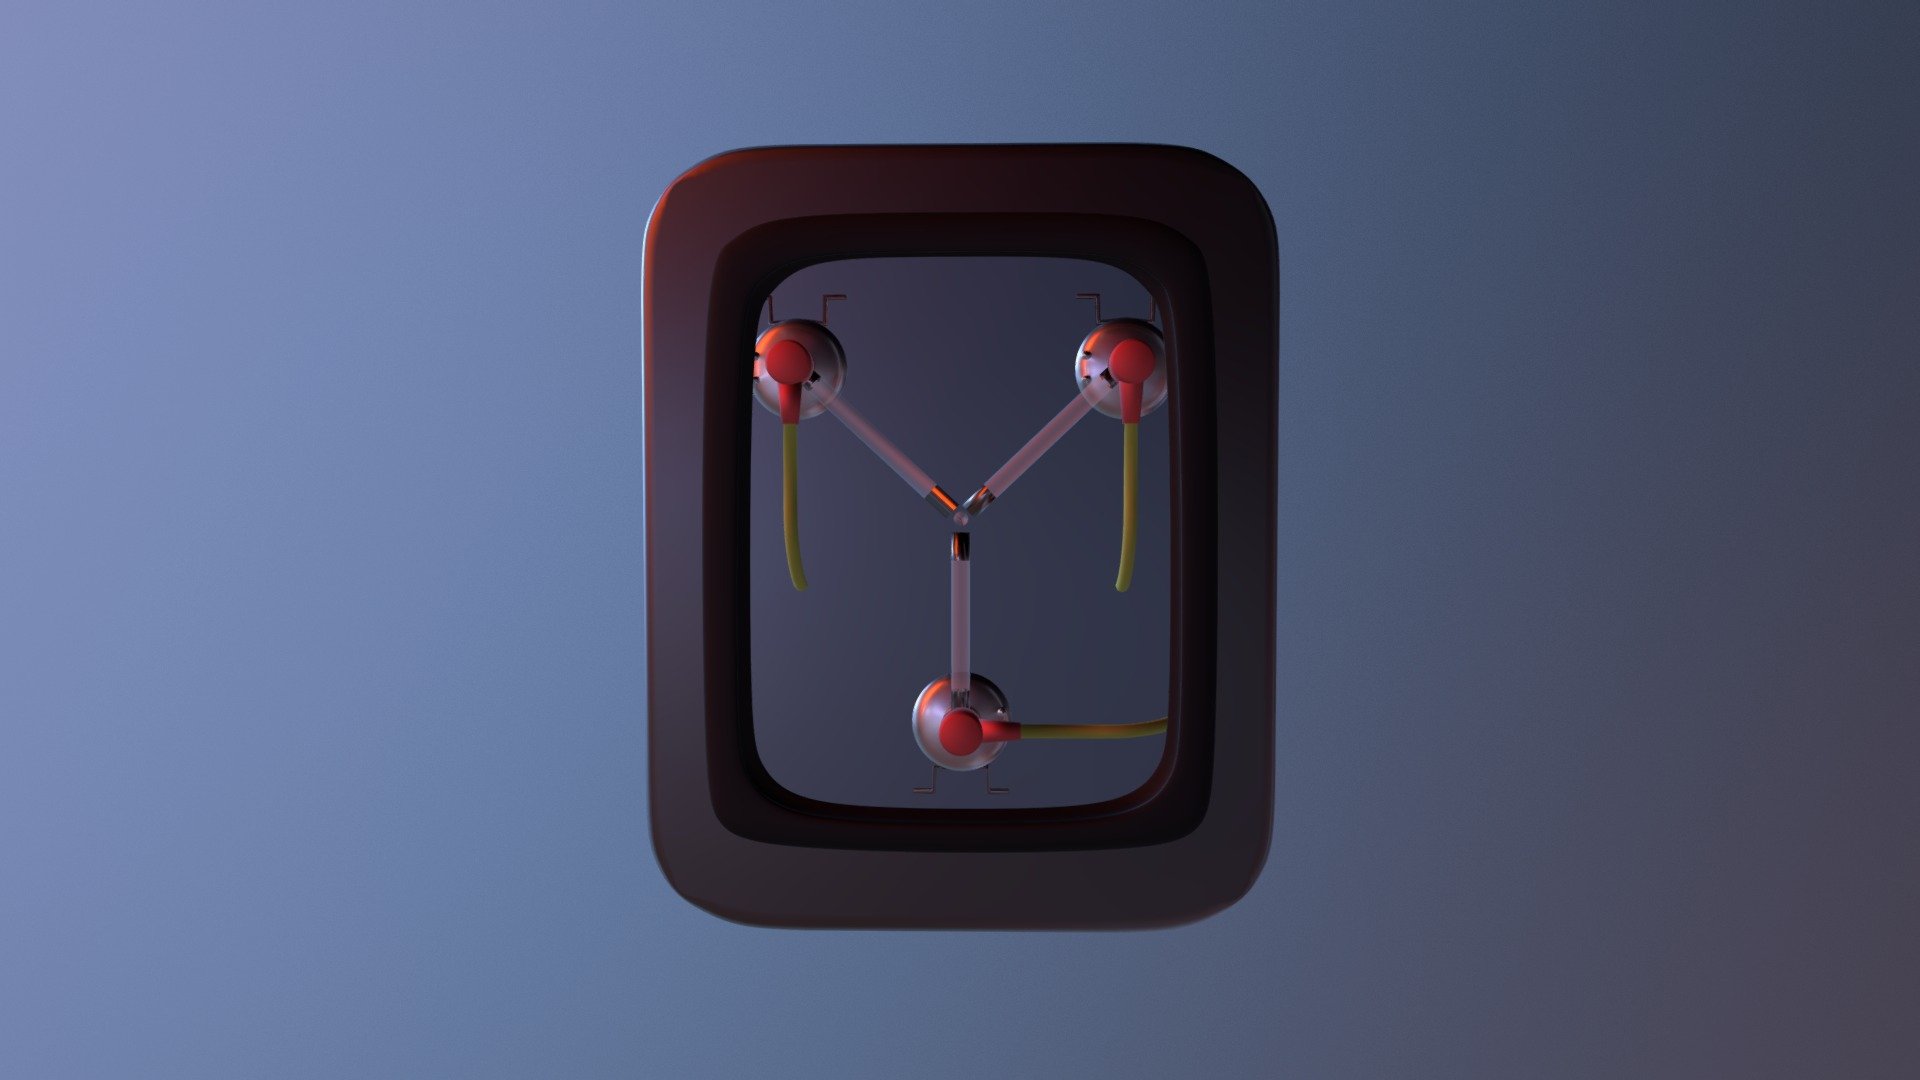 flux capacitor animation